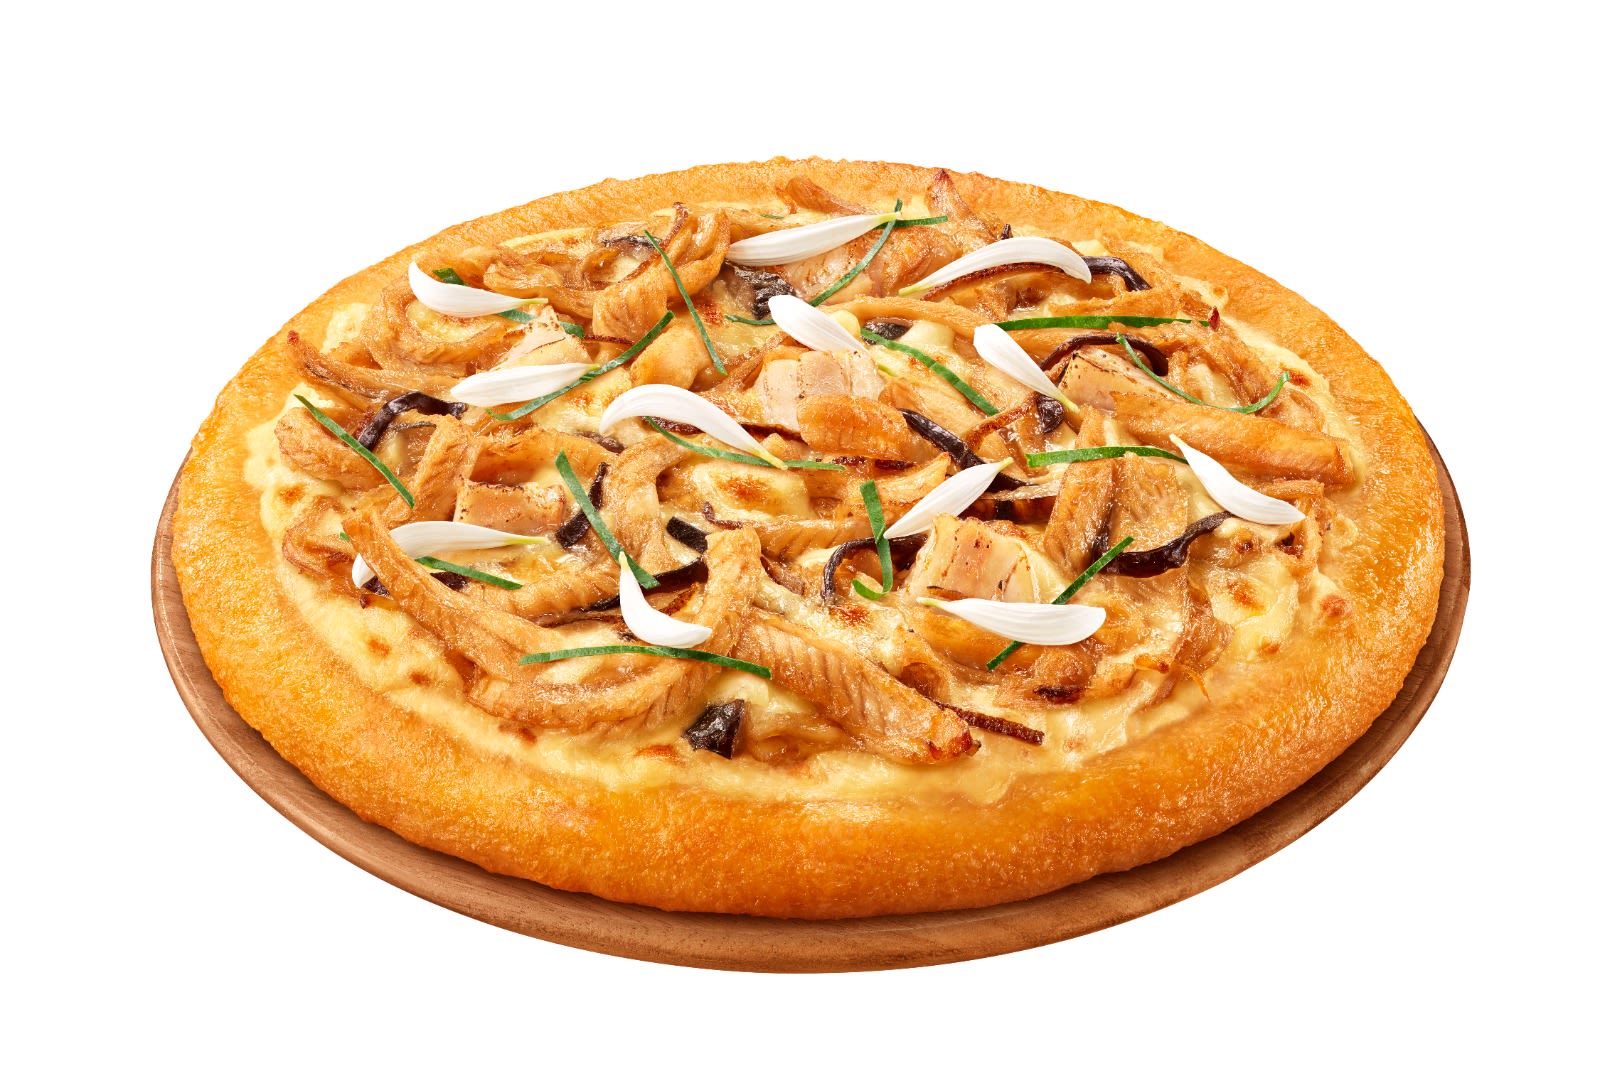 Hong Kong's Pizza Hut is partnering up with a local century-old restaurant to introduce a new snake-soup pizza.